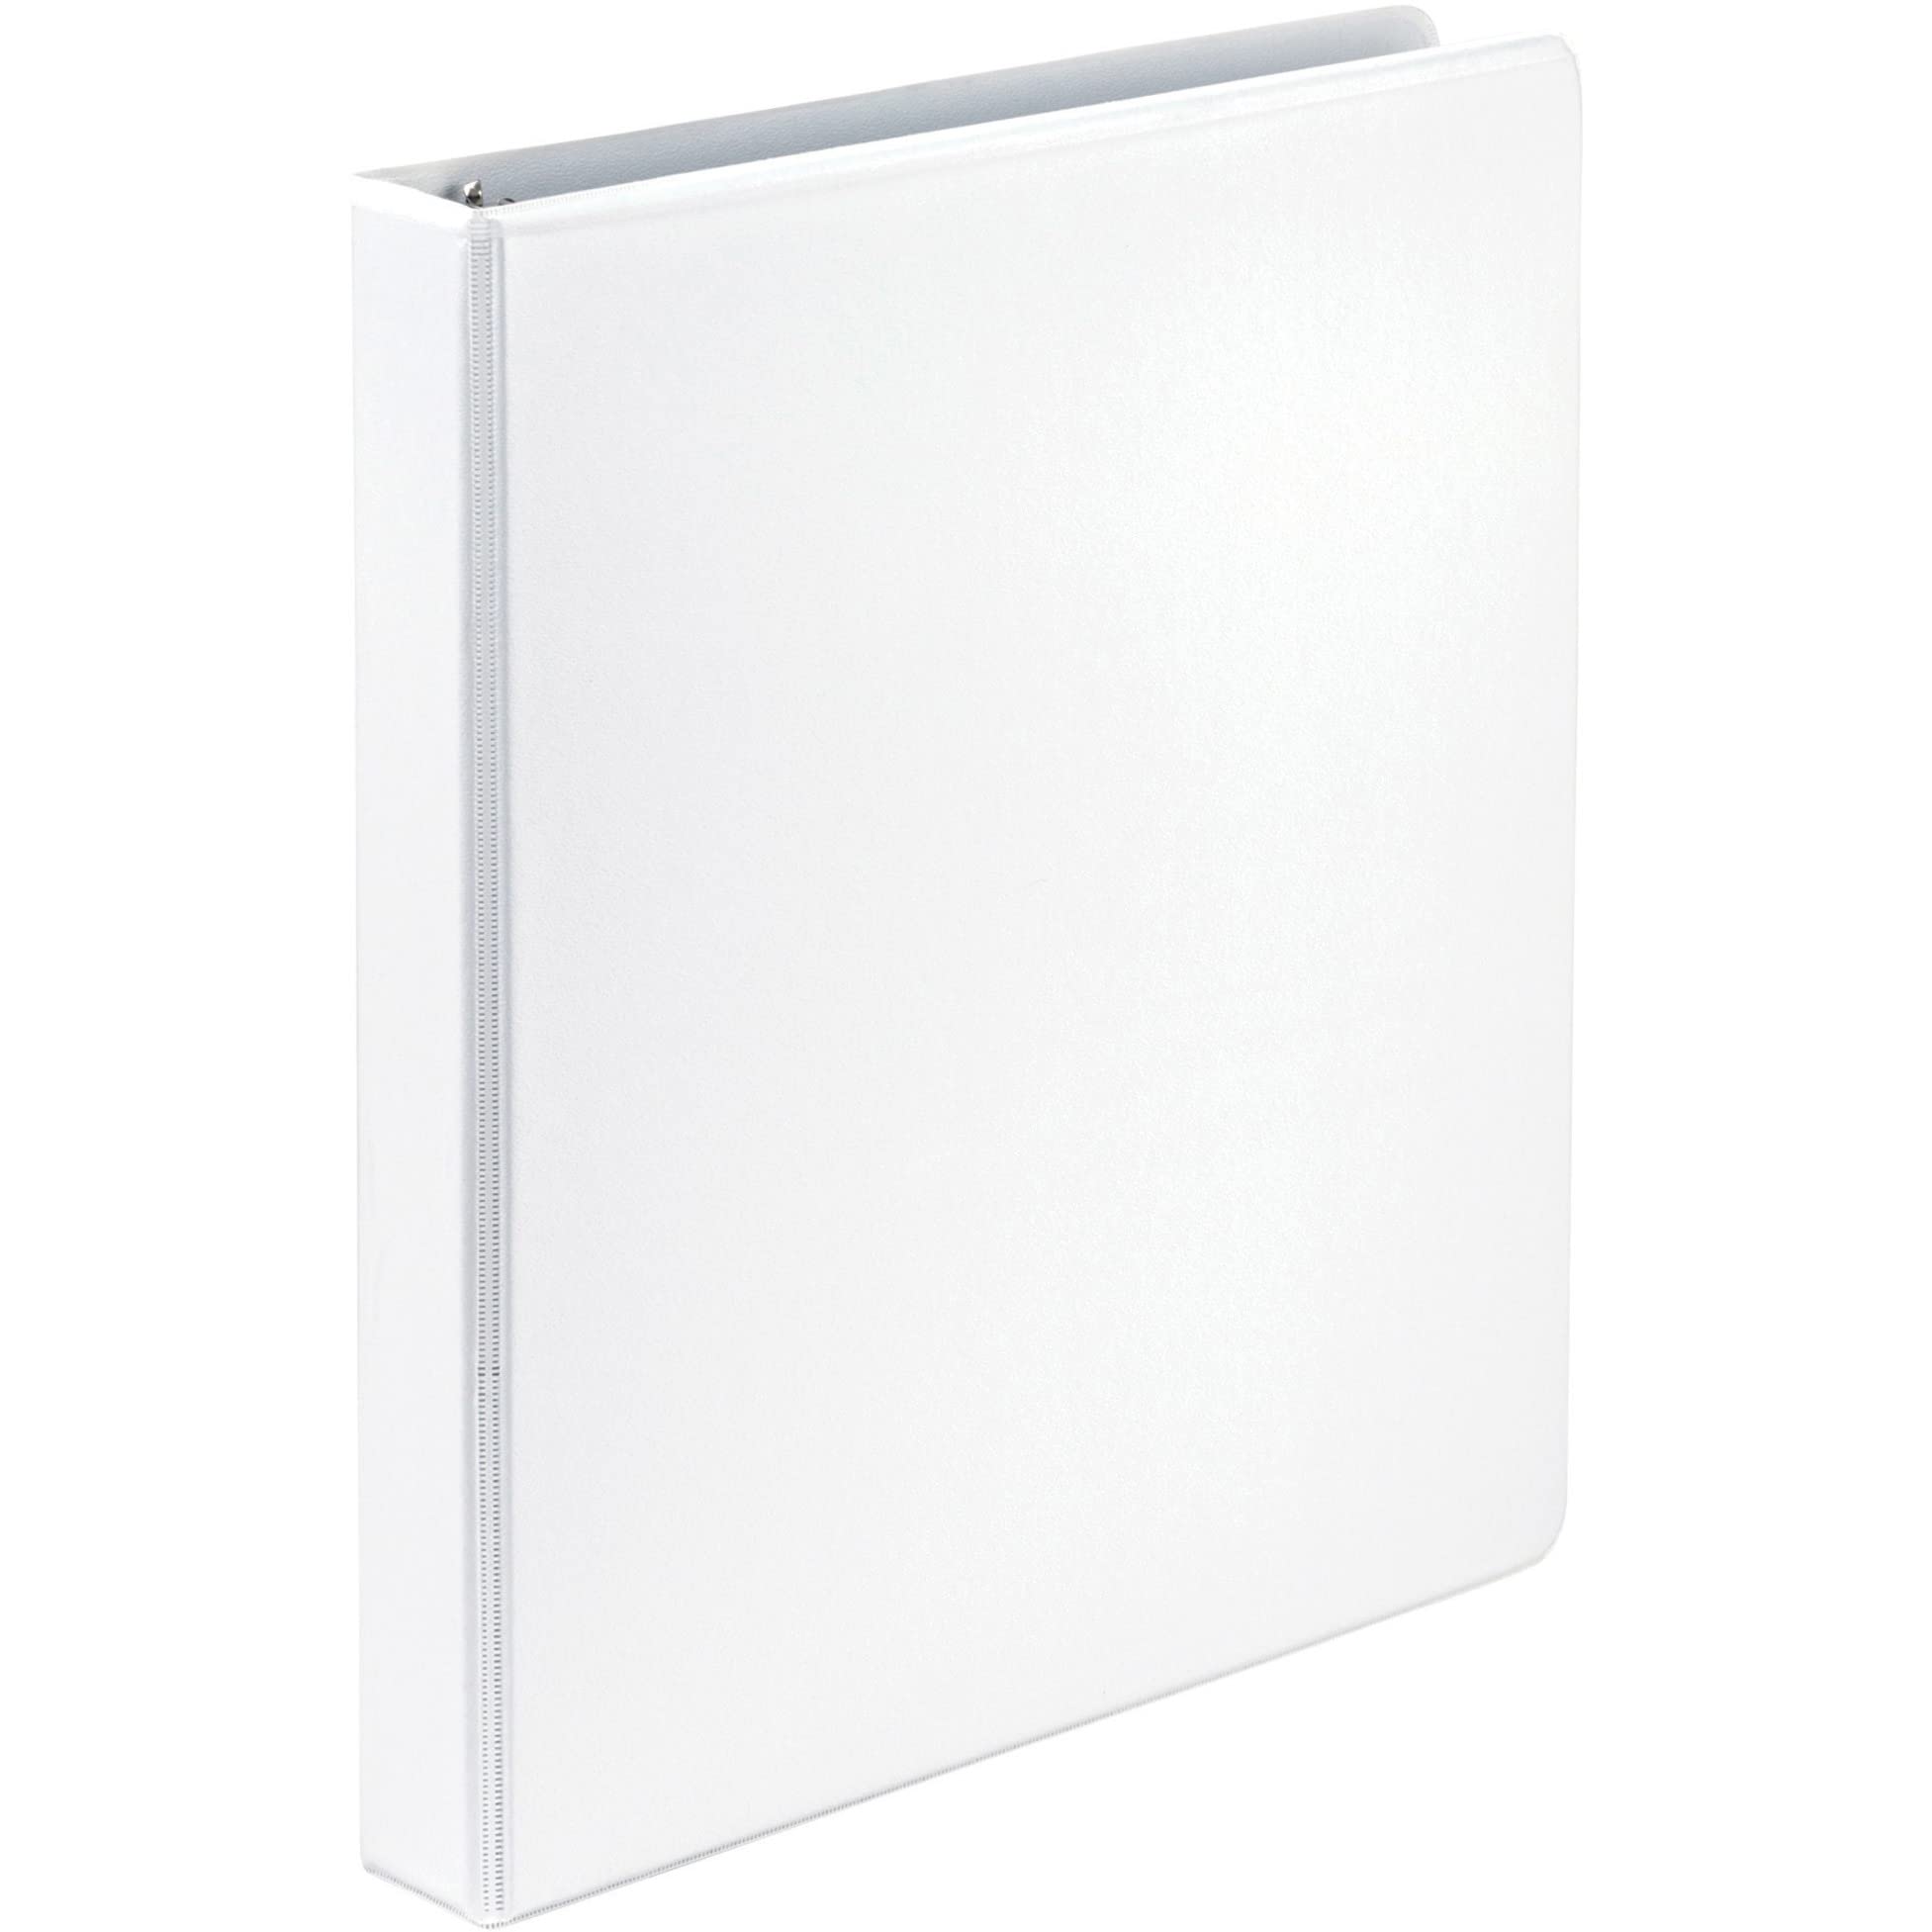 Book Cover Samsill Economy 1 Inch 3 Ring Binder, Made in the USA, Round Ring Binder, Customizable Clear View Cover, White, 12 Pack (I008537C) 1-Inch White 12-Pack